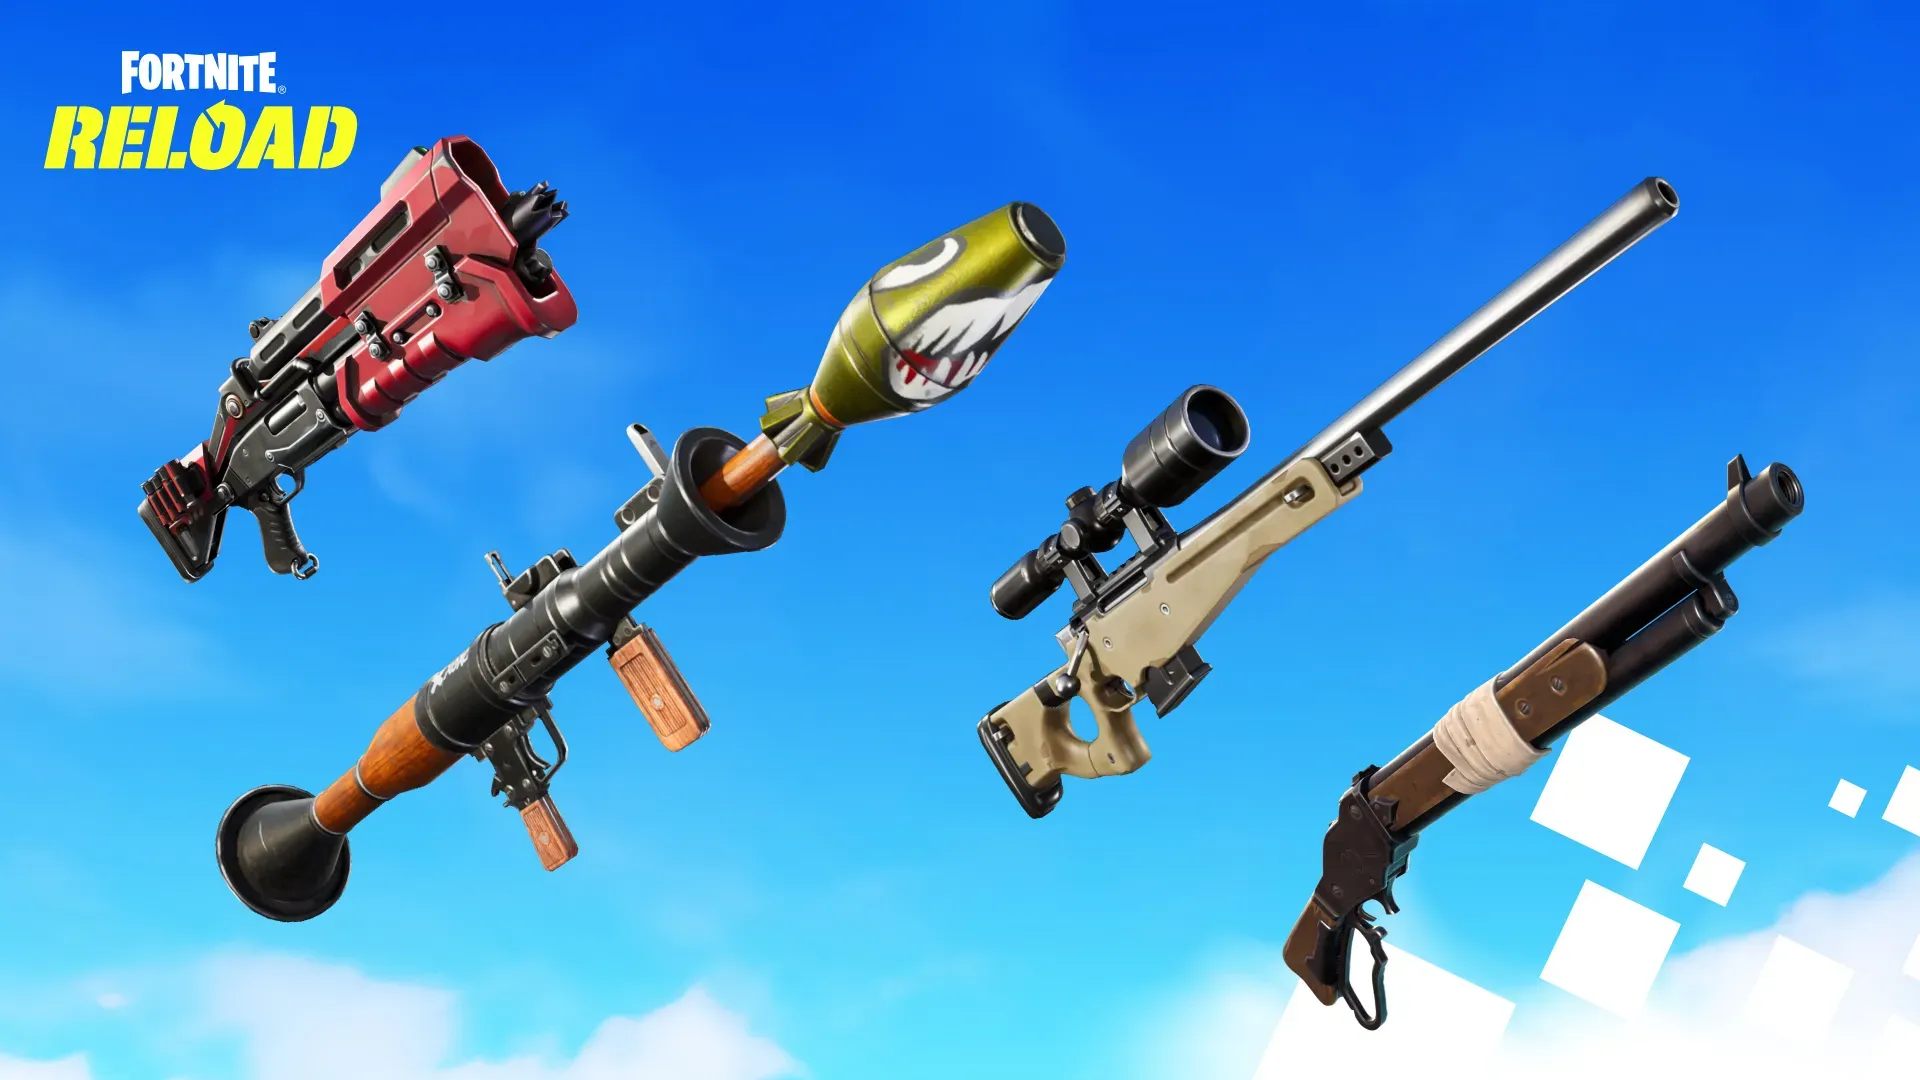 The Tactical Shotgun, Rocket Launcher, Bolt-Action Sniper Rifle, and Lever Action Shotgun are a few of the weapons you’ll see in Reload.